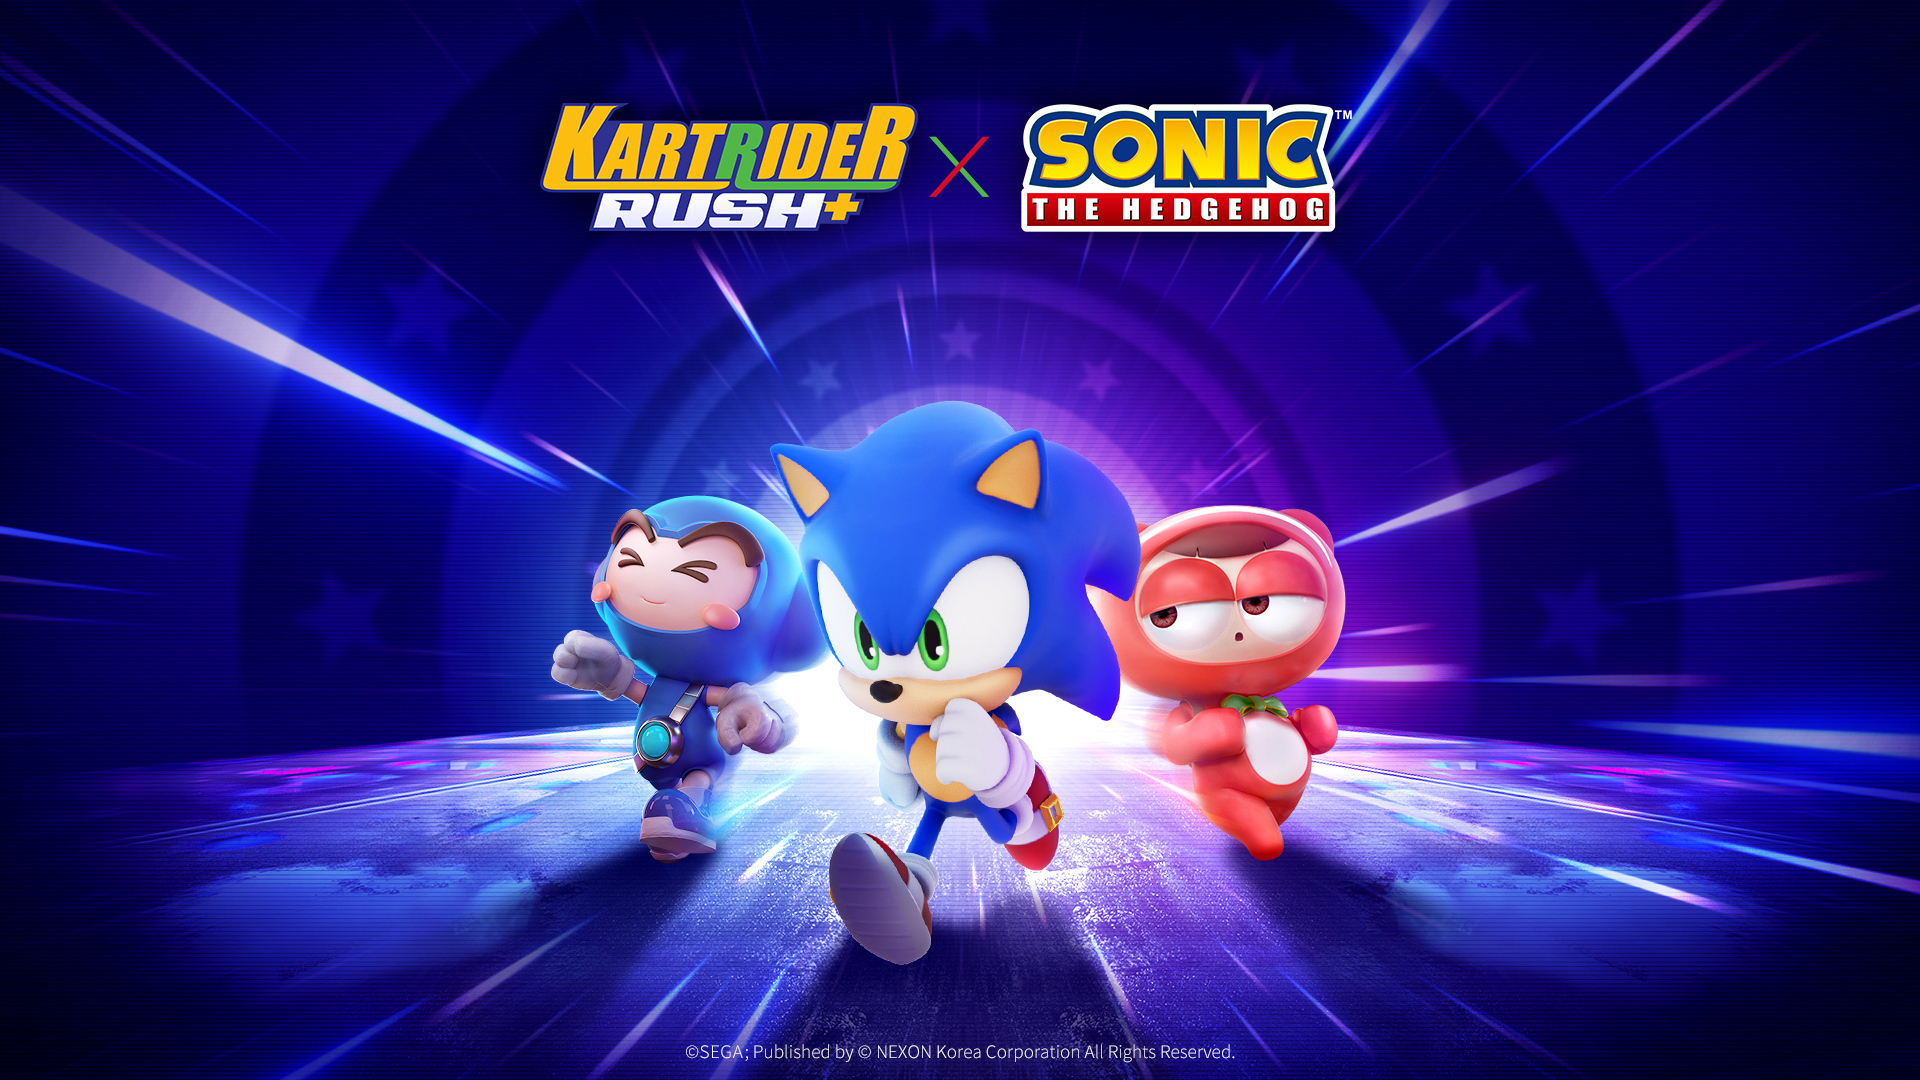 KartRider Rush+ Joins Forces With SEGA's Sonic The Hedgehog!